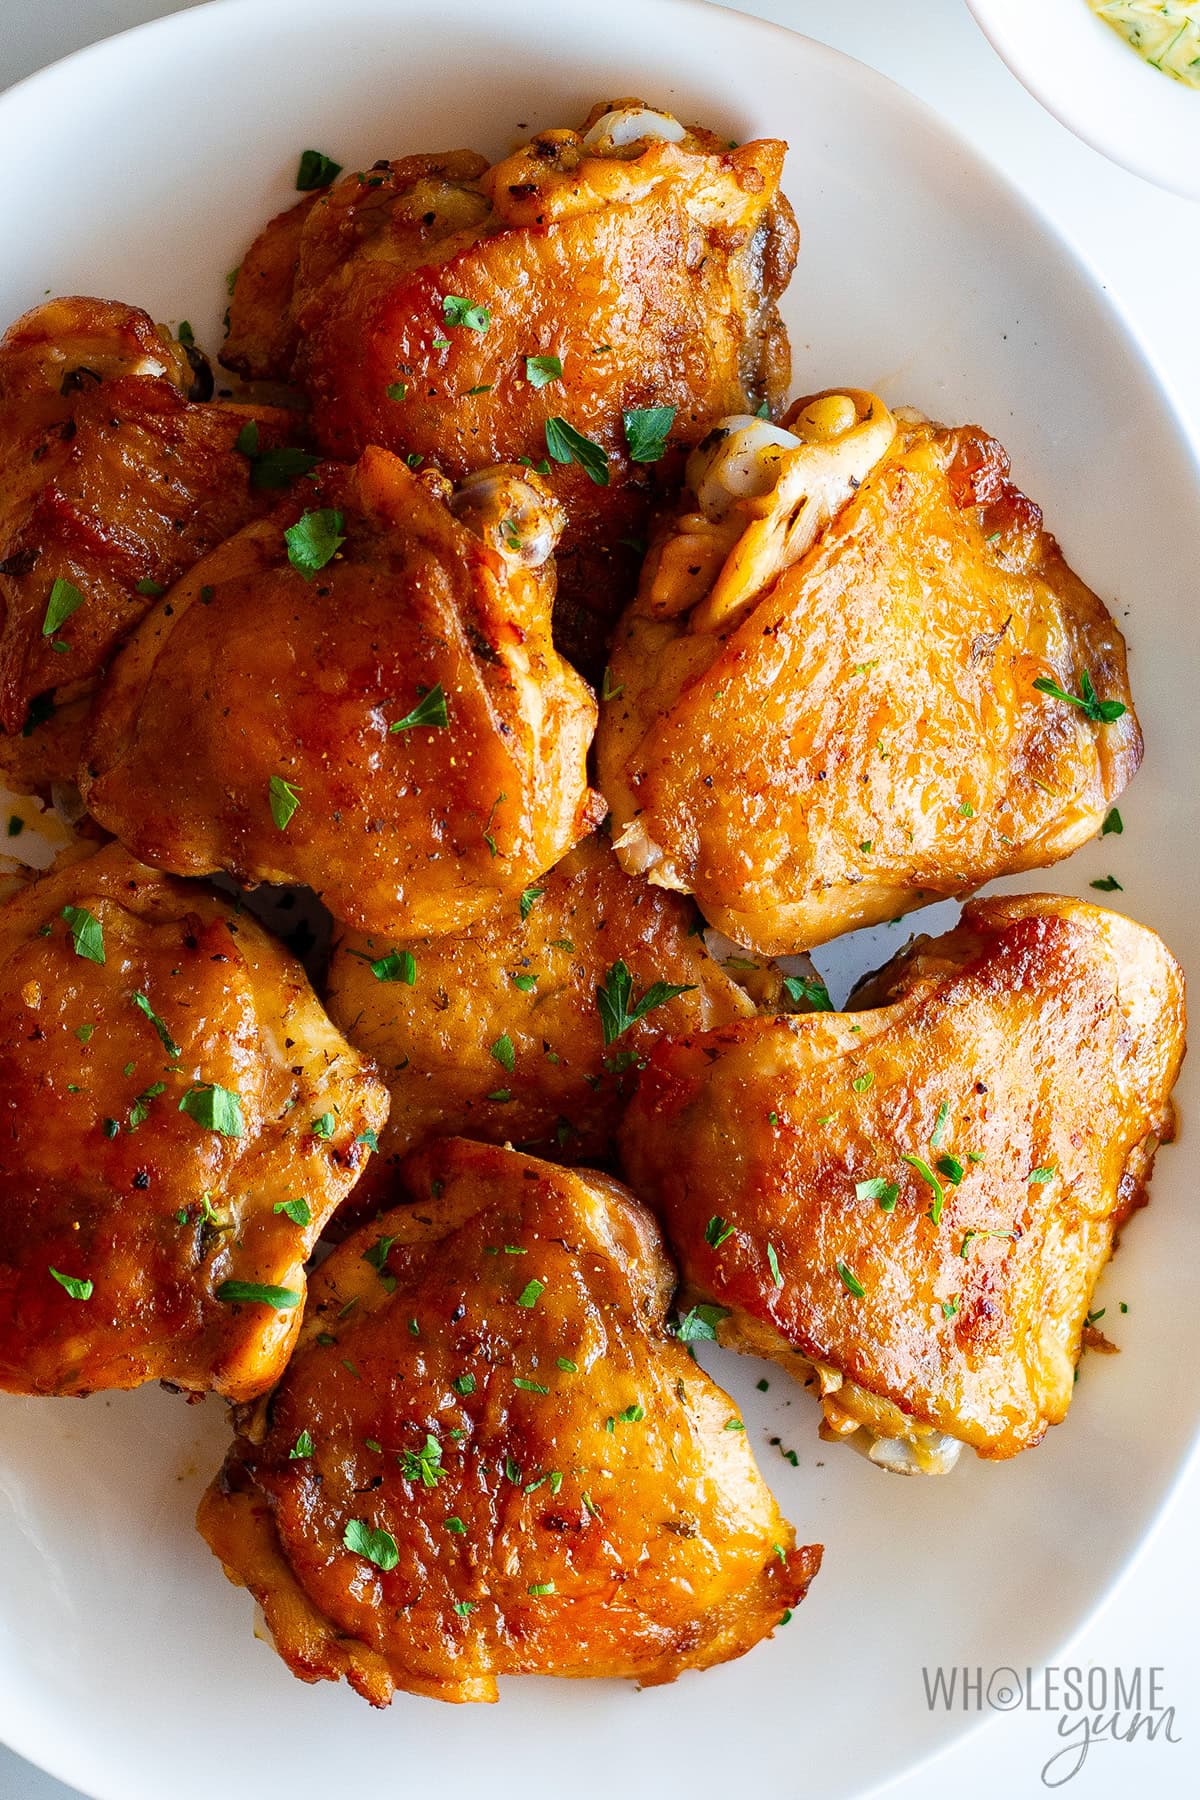 Baked chicken thighs on a platter garnished with fresh parsley.